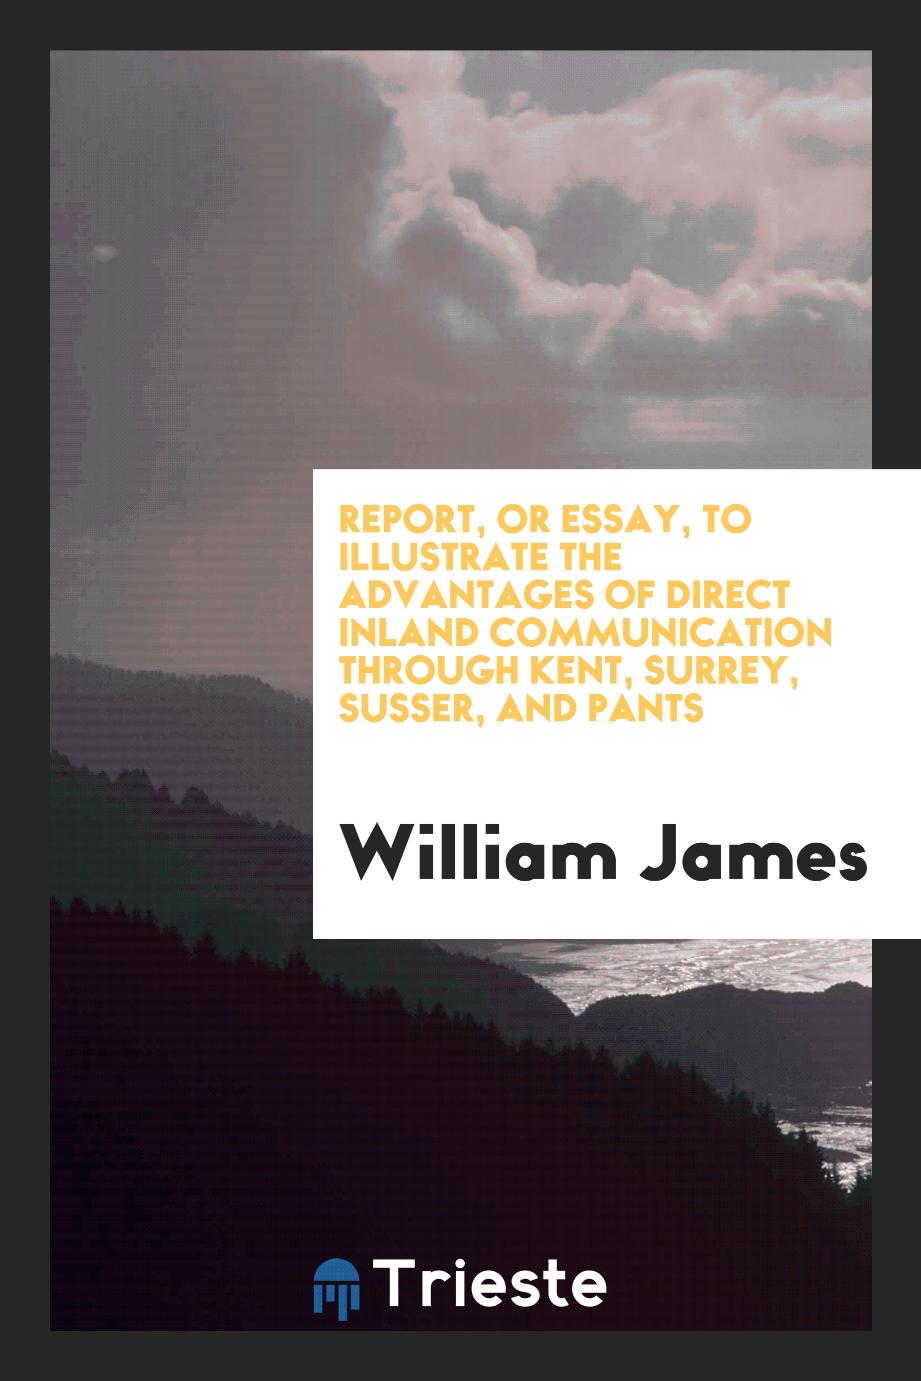 Report, or essay, to illustrate the advantages of direct inland communication through Kent, Surrey, Susser, and Pants